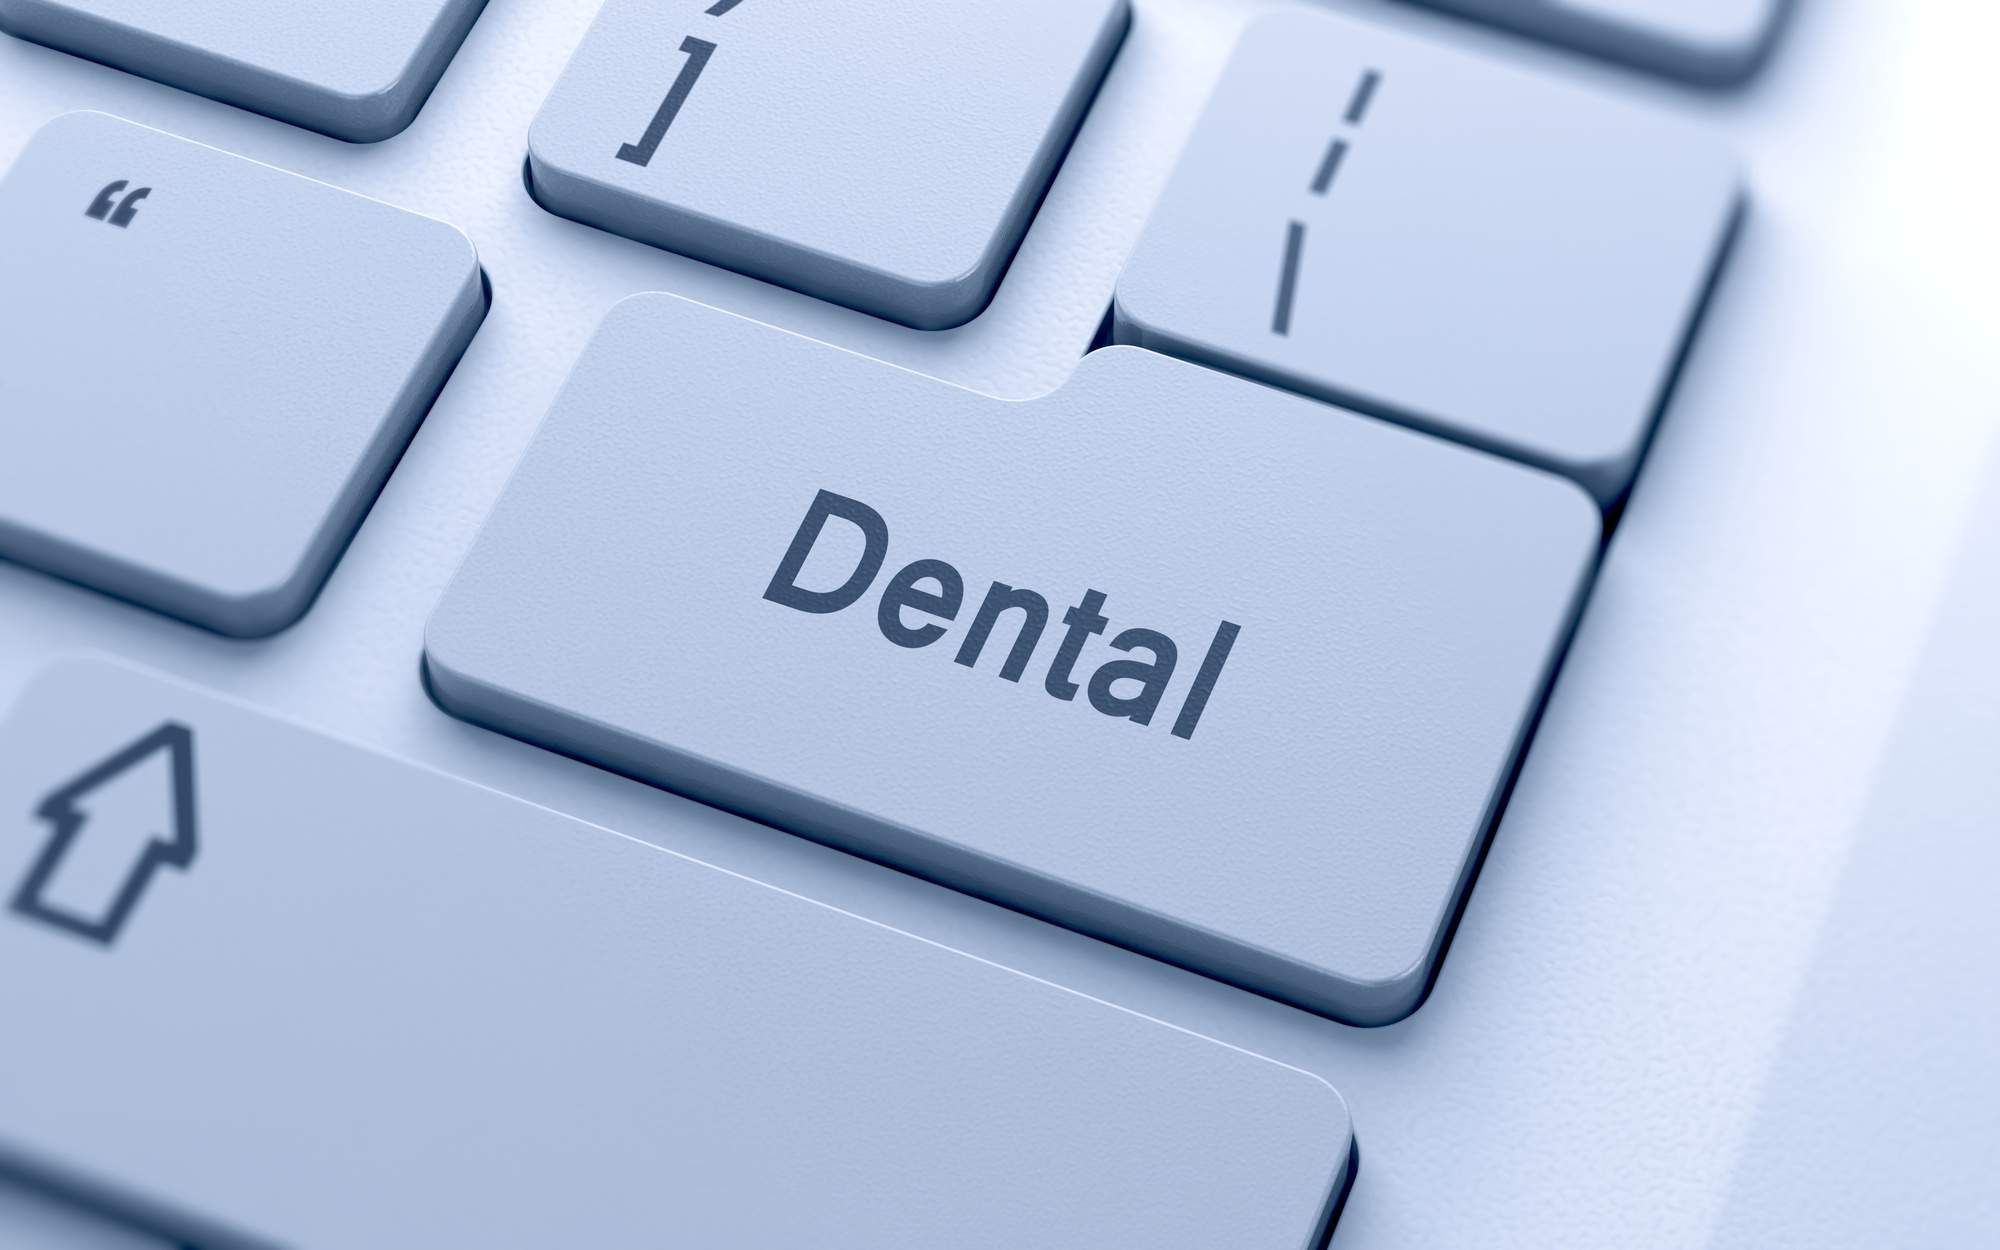 How Does Digital Dentistry Improve Patient Care?